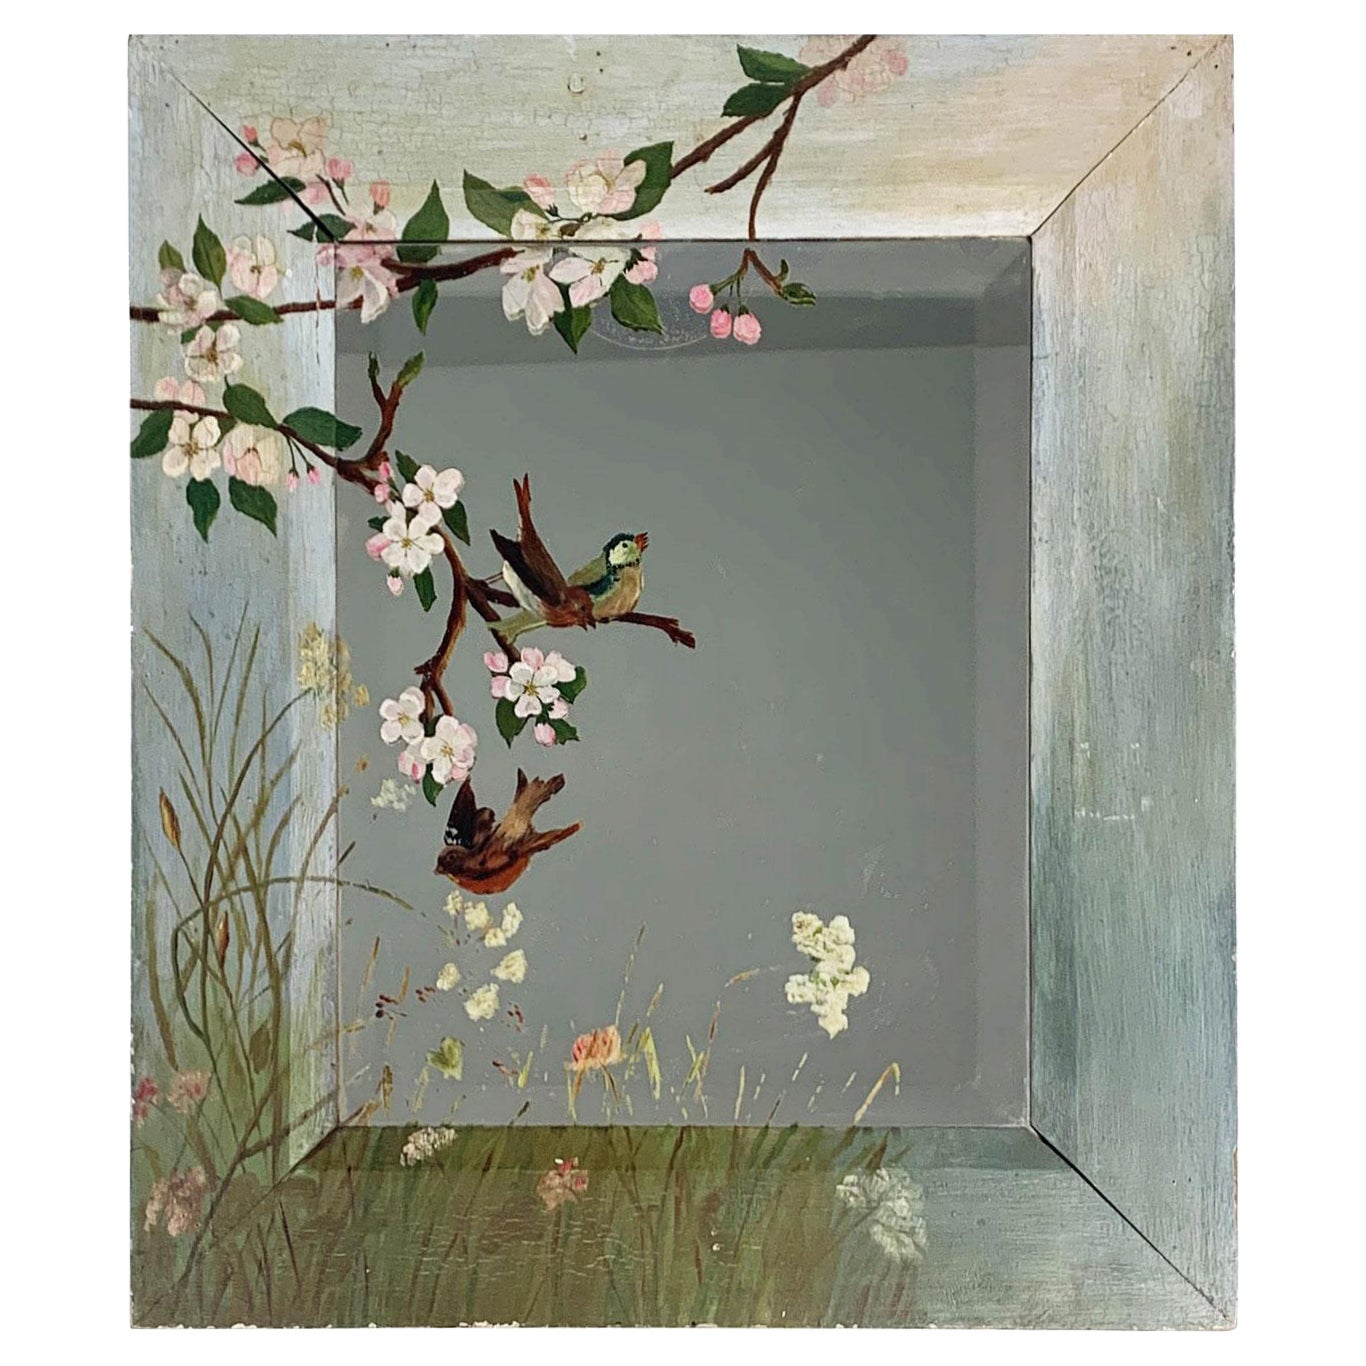 Decorated Cottage Mirror Beveled Glass Painted w/Birds and Blossoms, circa 1890